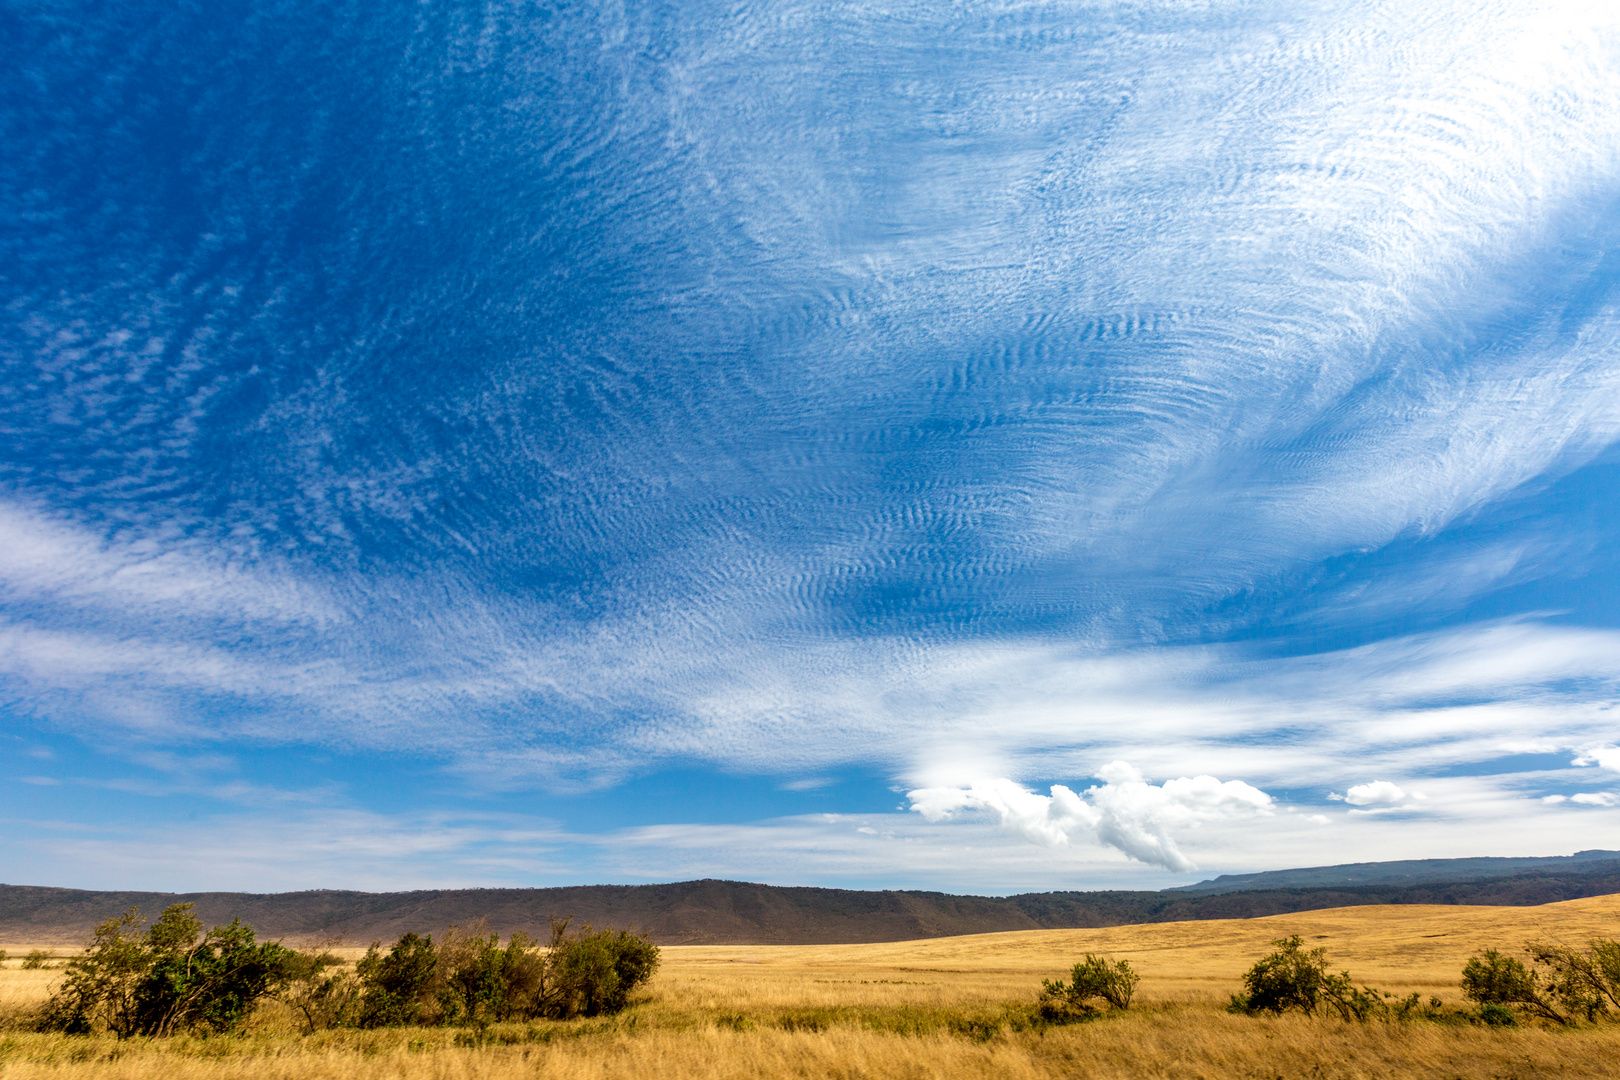 Sky in the Crater of Ngorongoro